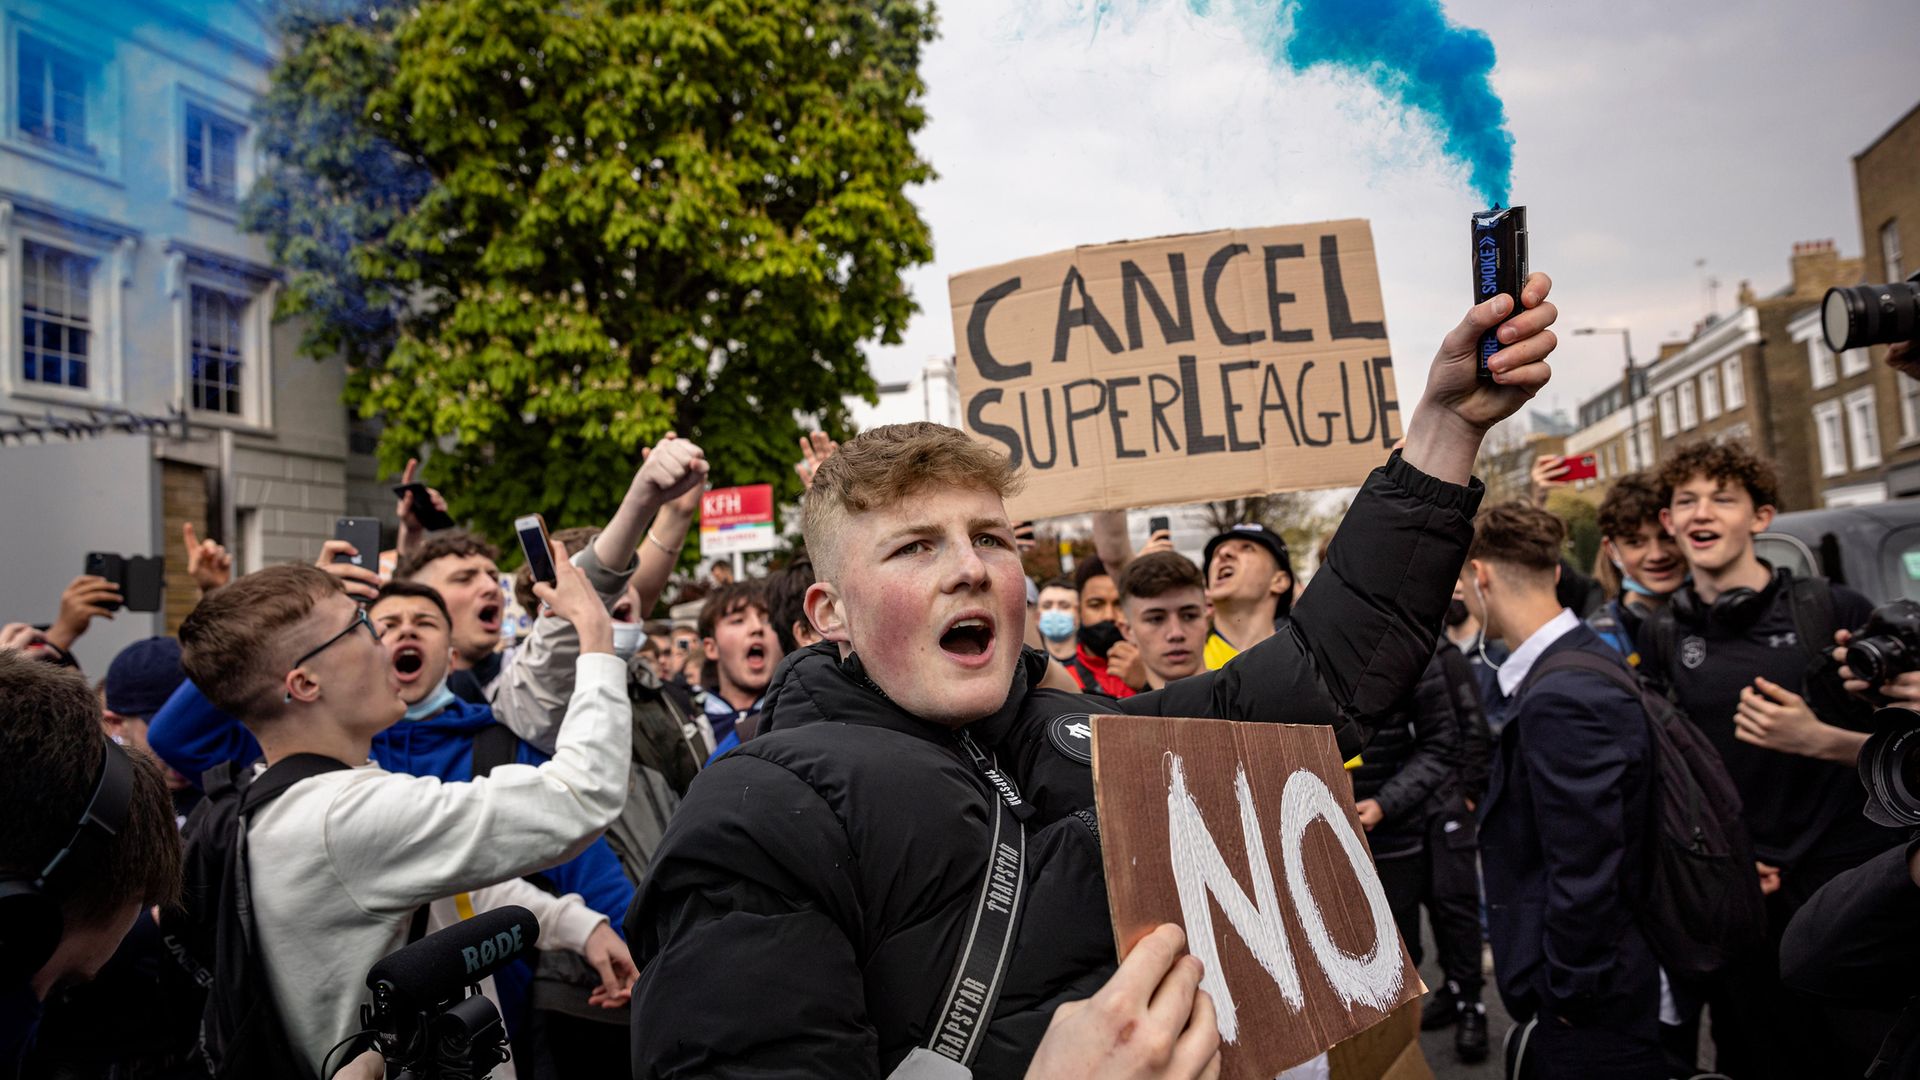 Fans of Chelsea Football Club protest against the European Super League outside Stamford Bridge - Credit: Getty Images